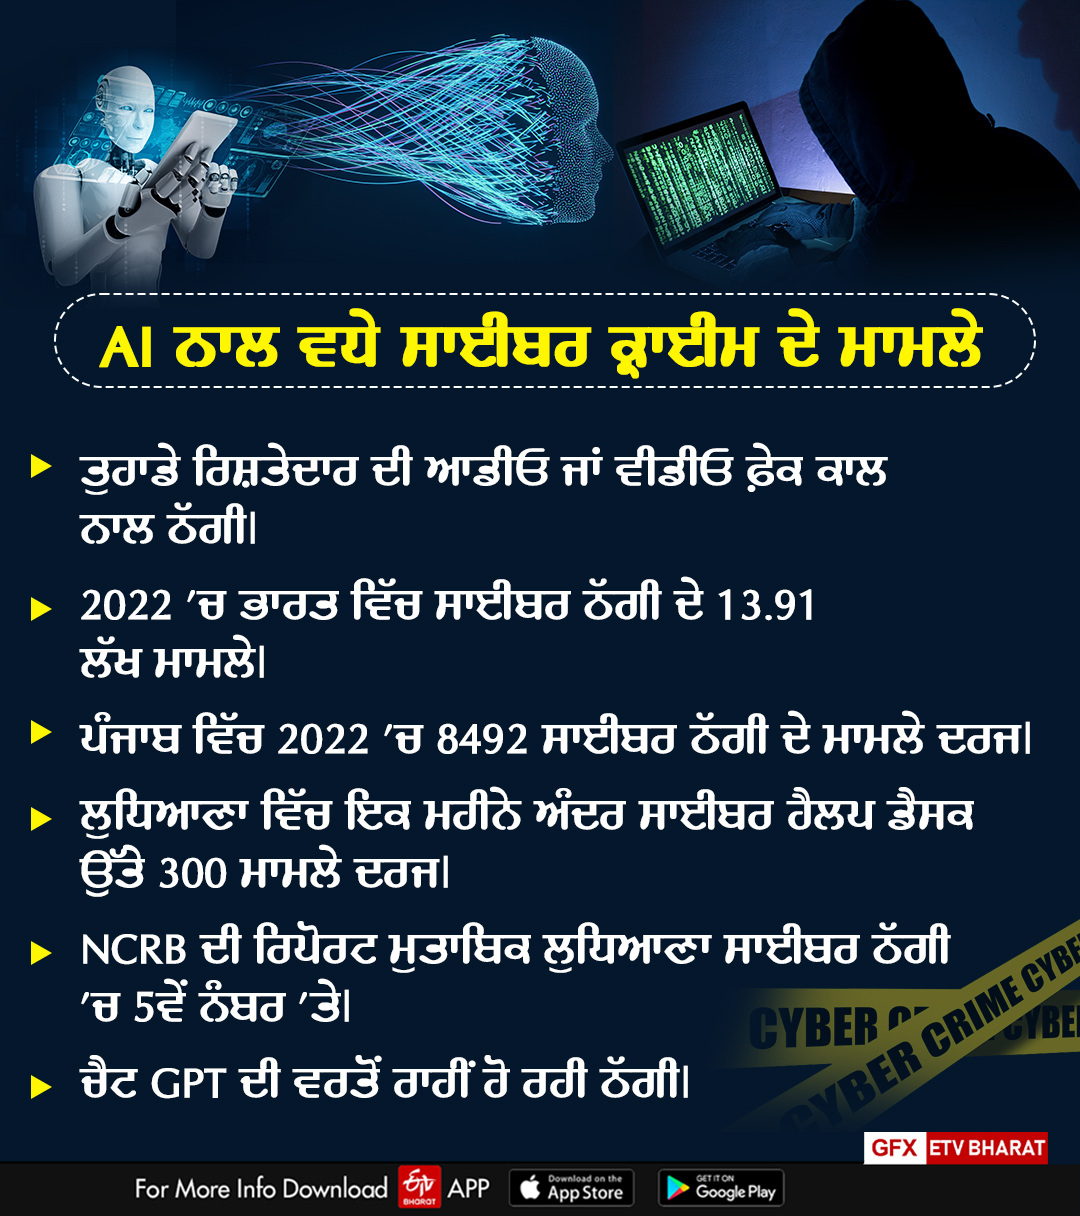 Cyber Crime With AI and on ChatGPT, Cyber Crime, Ludhiana